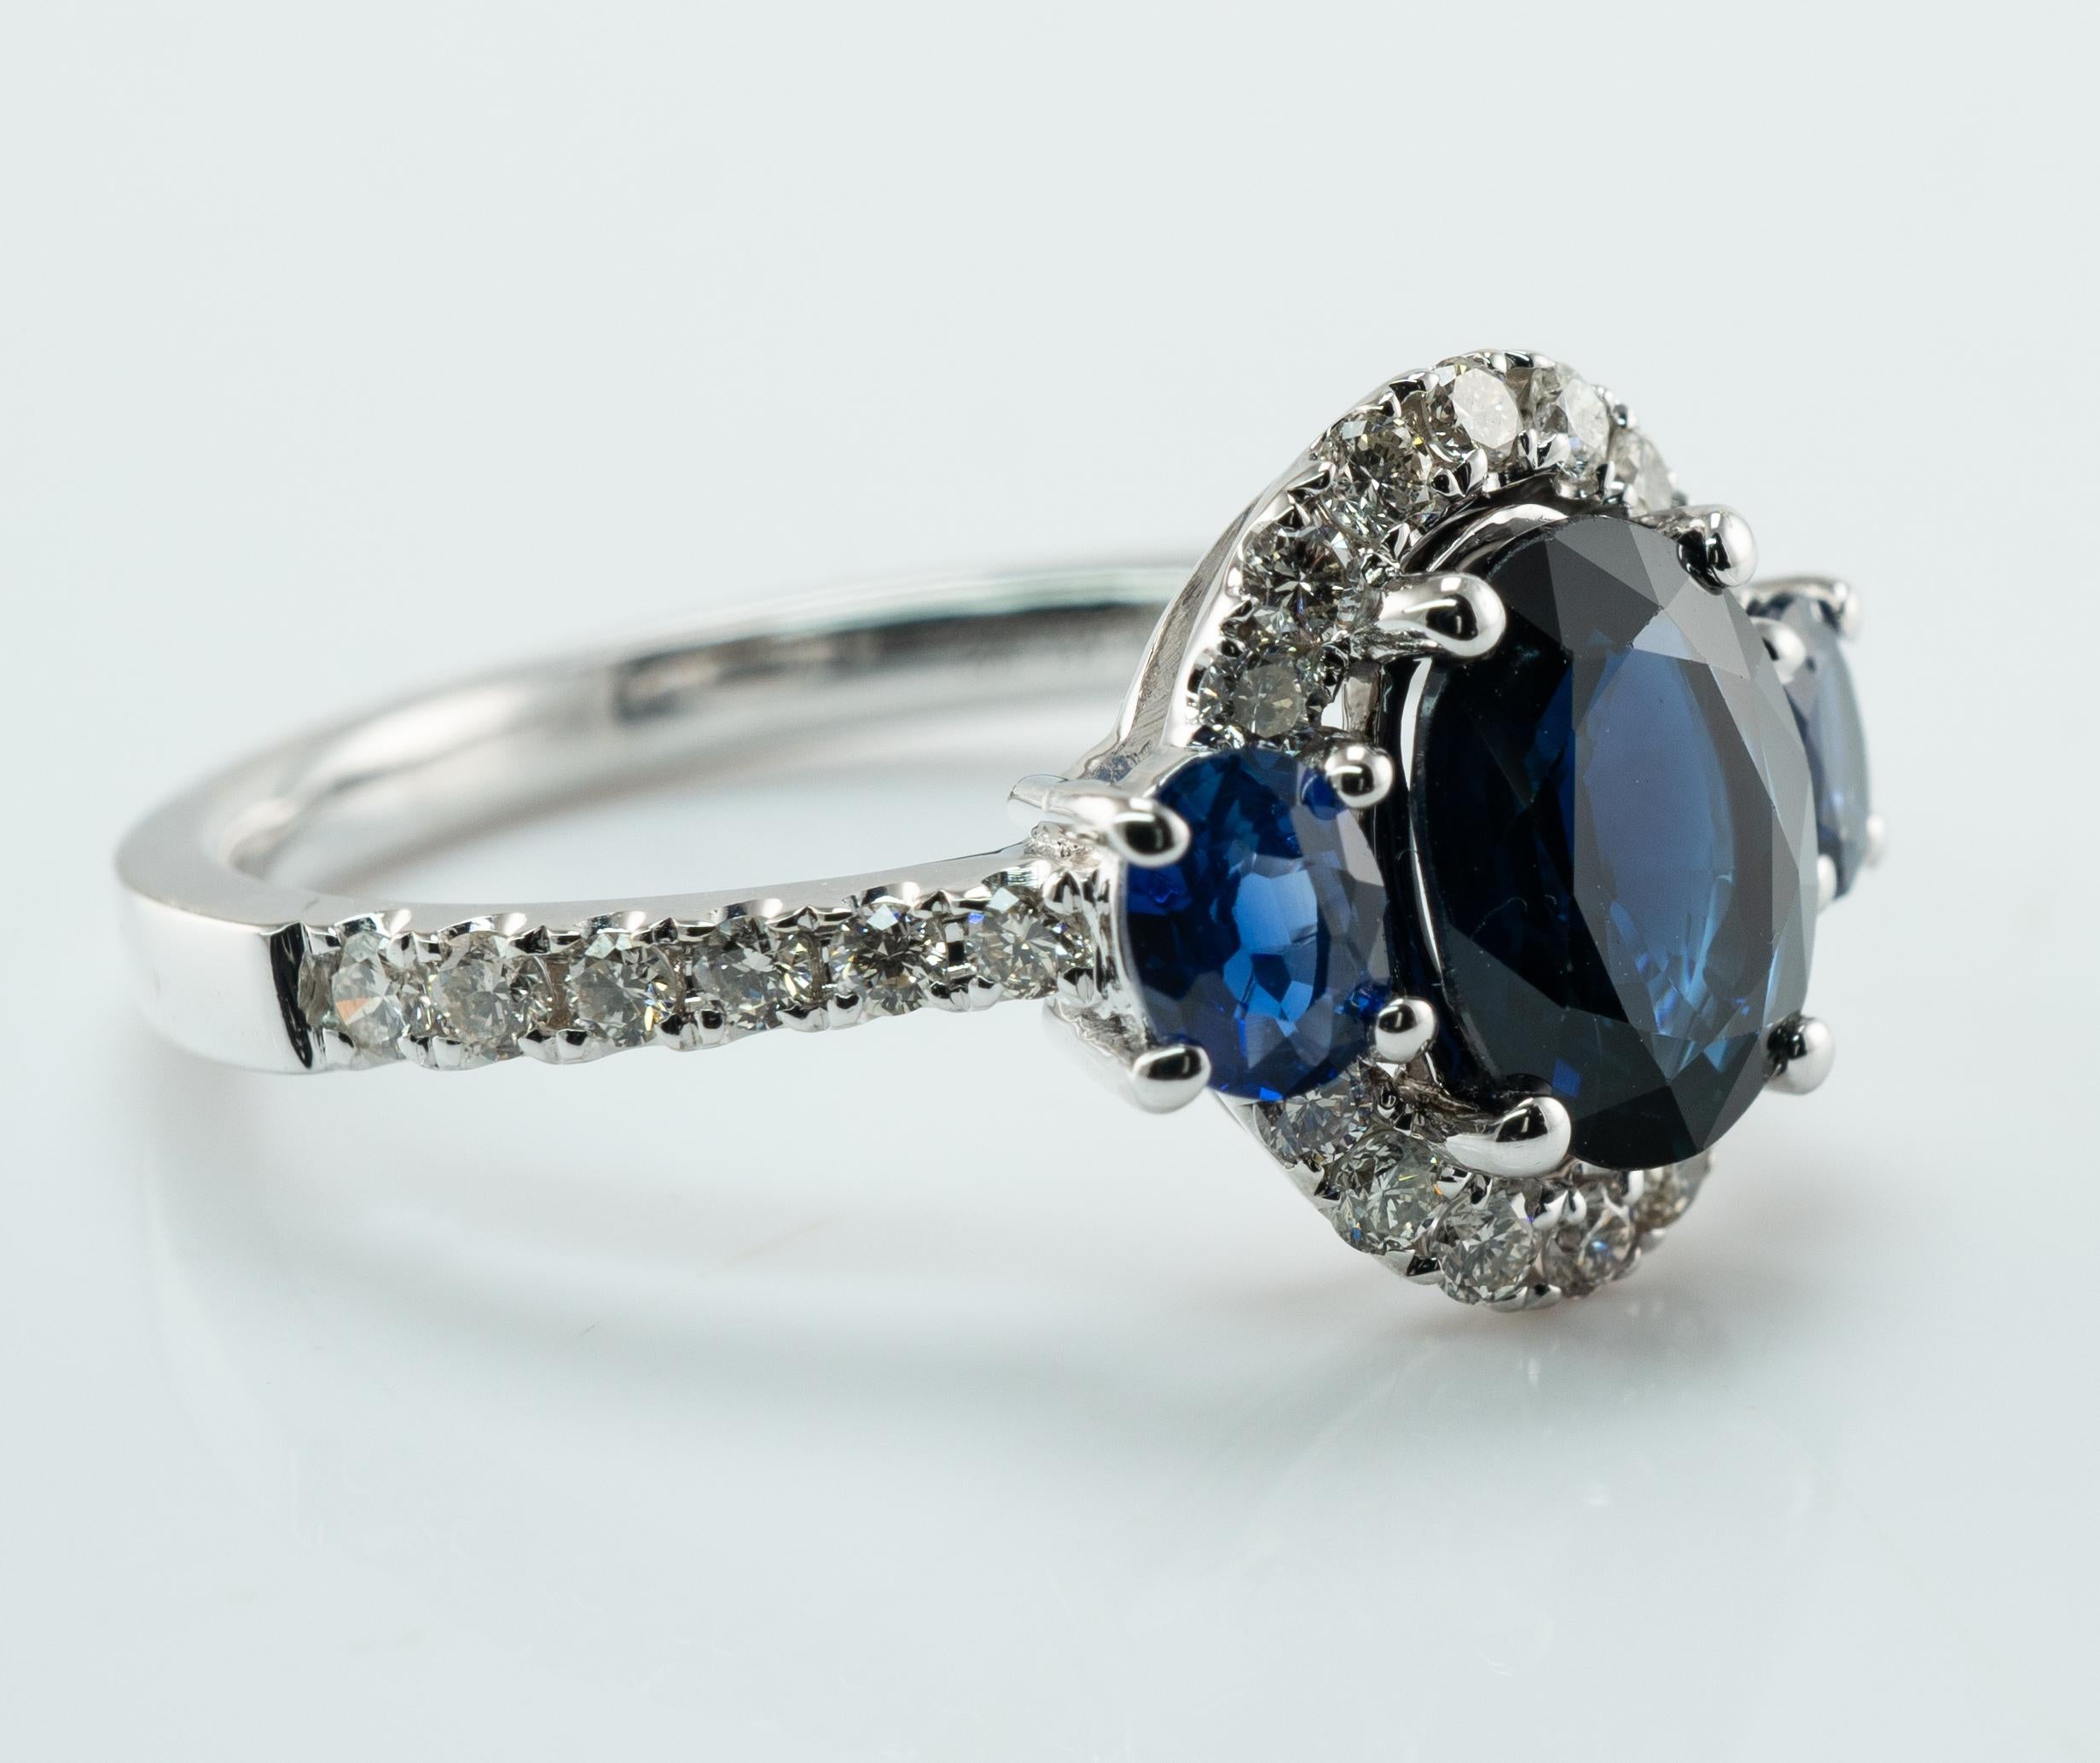 Natural Diamond Sapphire Ring 14K White Gold Band Halo

This lovely estate ring is finely crafted in solid 14K White Gold and set with genuine Earth mined Sapphires and white and fiery diamonds. 
The center oval cut Sapphire measures 8x6mm (1.55